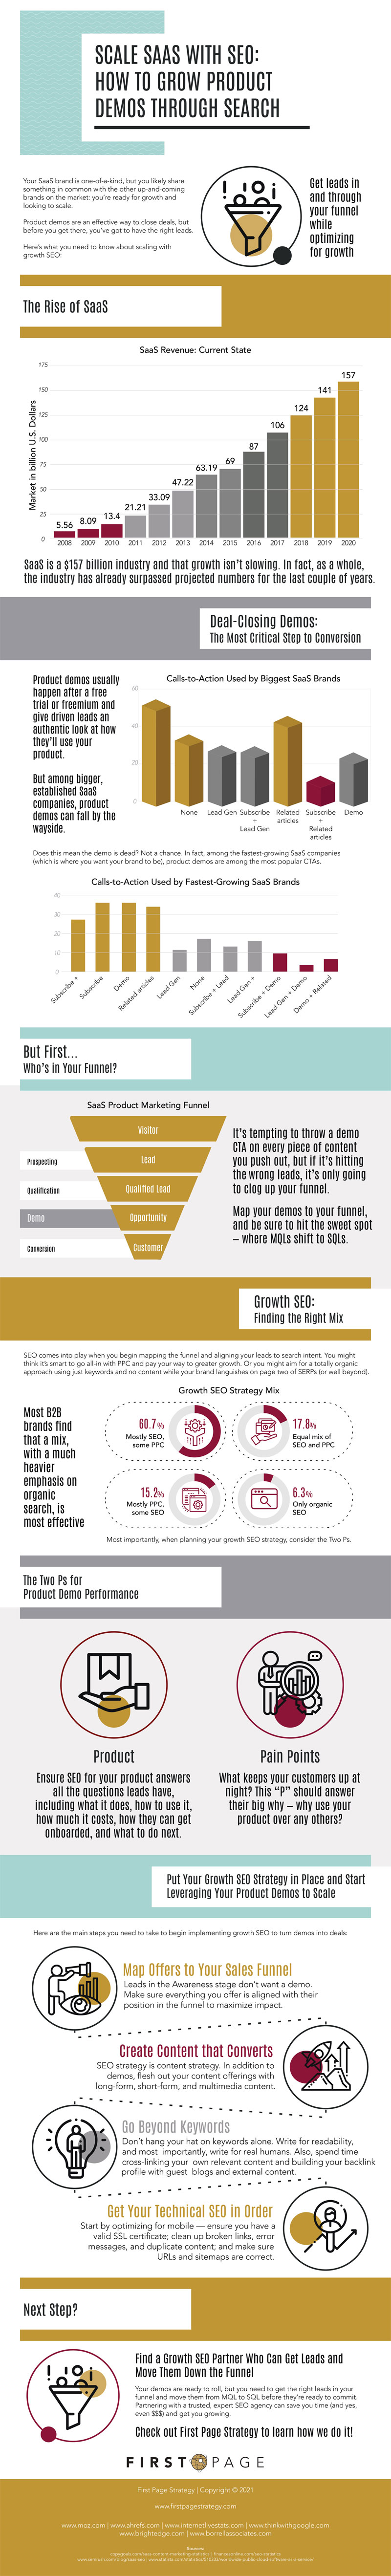 Scale SAAS With SEO : #infographic #best infographics #infographic s #Marketing